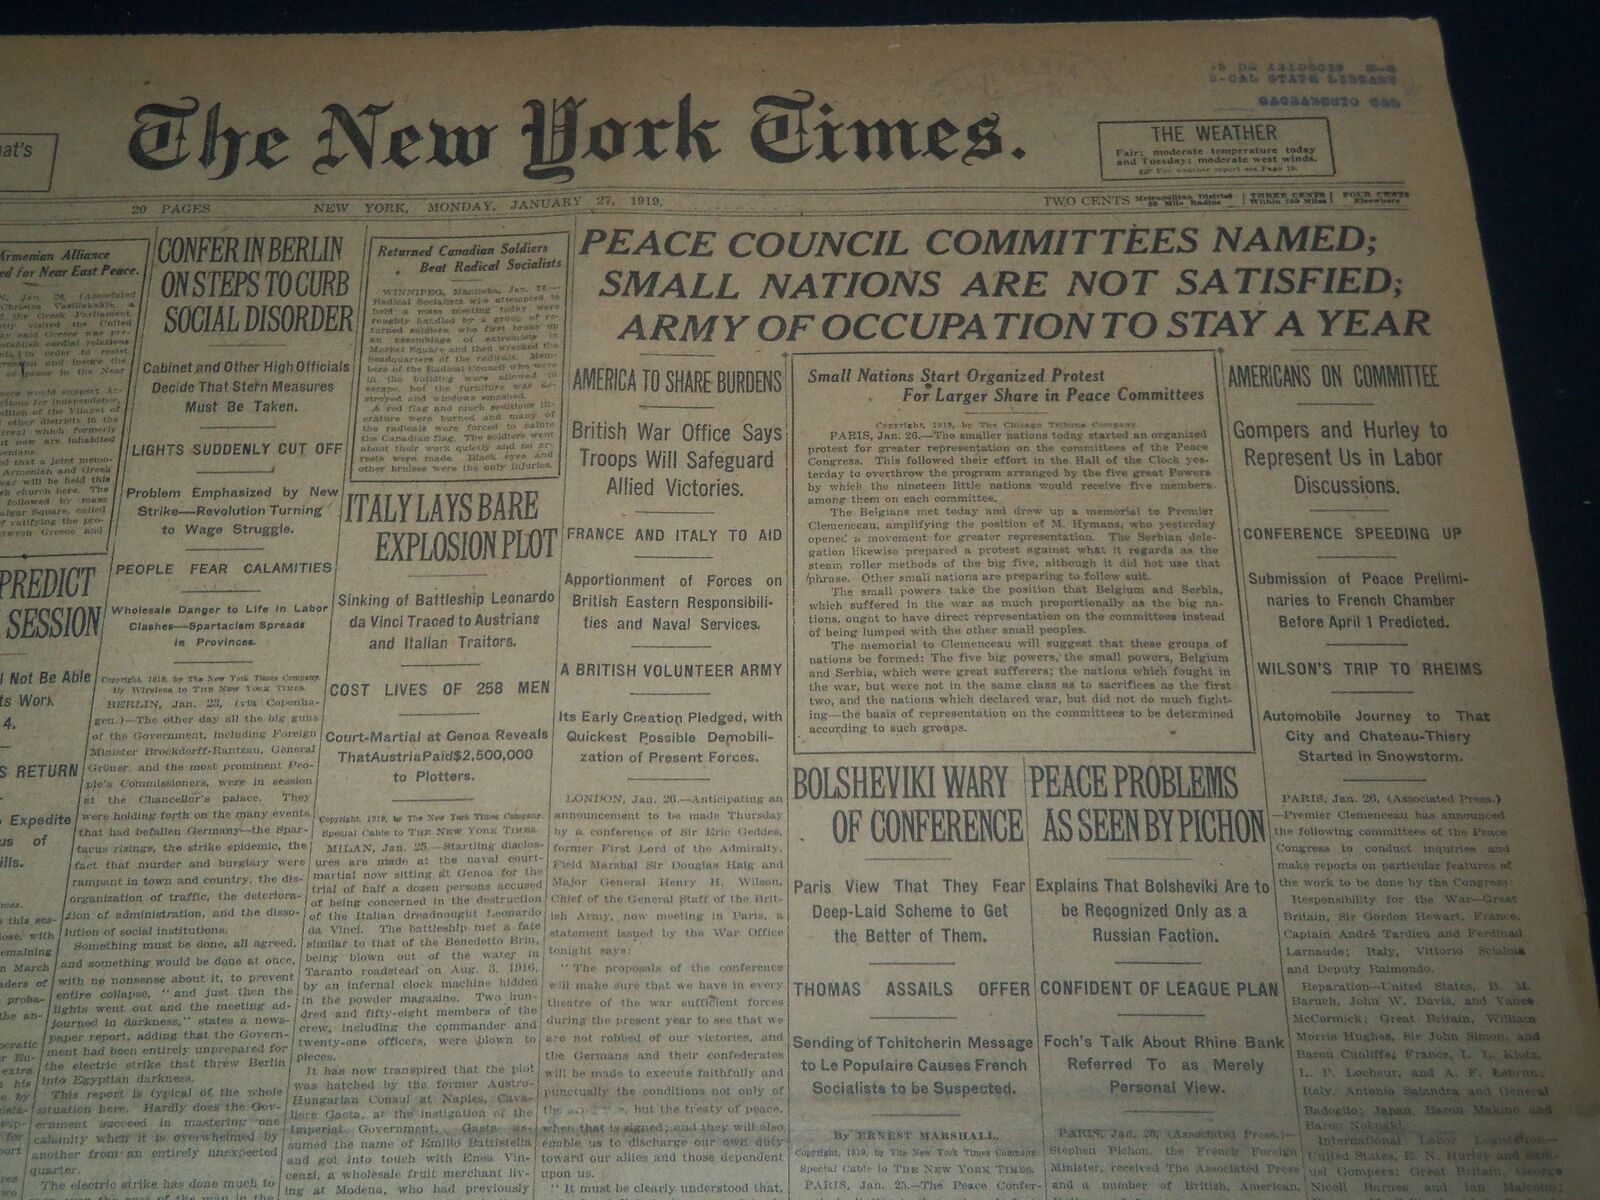 1919 JANUARY 27 NEW YORK TIMES - PEACE COUNCIL COMMITTEES NAMED - NT 7519